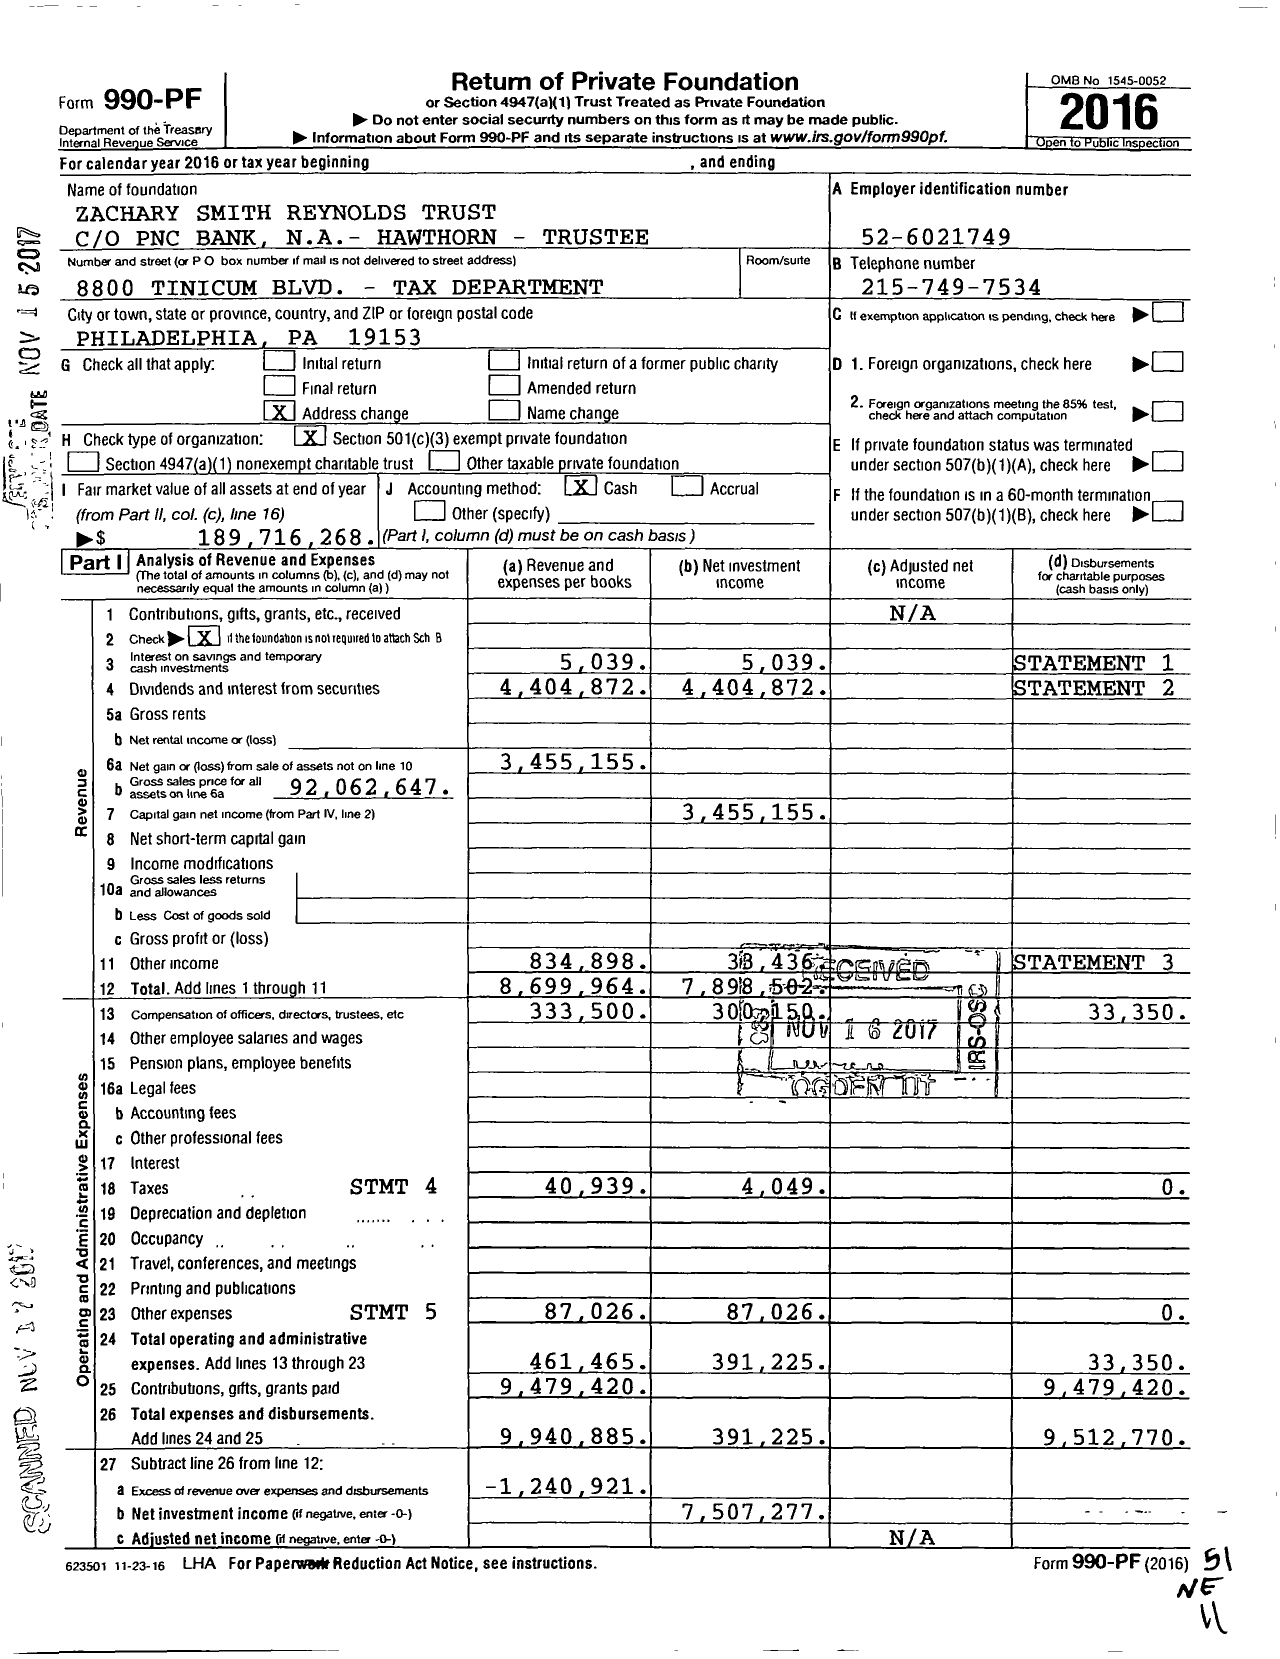 Image of first page of 2016 Form 990PF for Zachary Smith Reynolds Trust